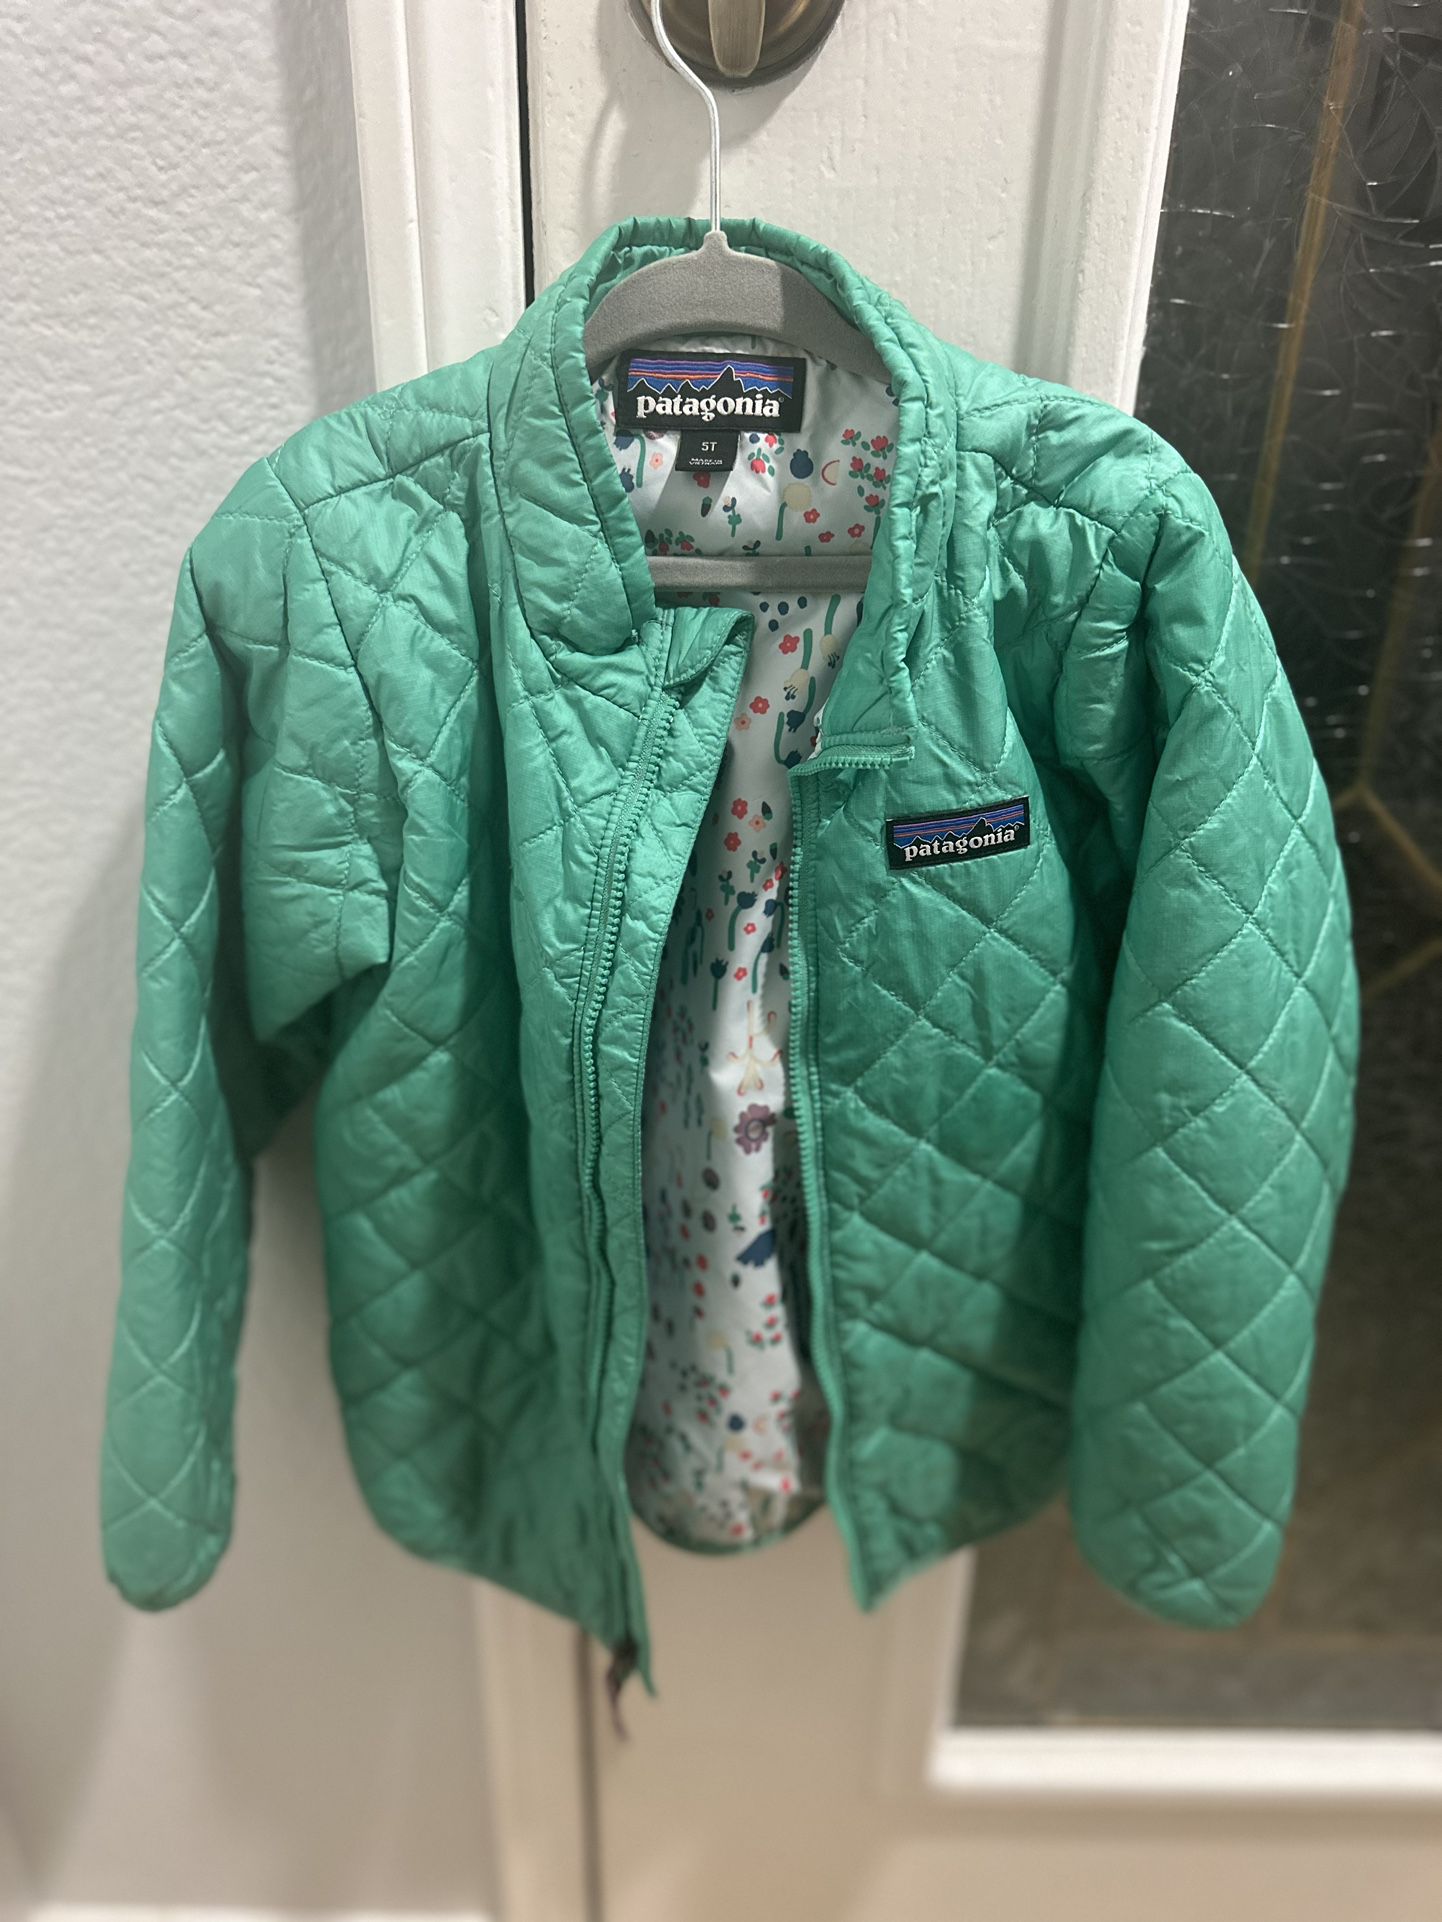 Patagonia Nano Puff - Teal Size 5T - Great Condition 